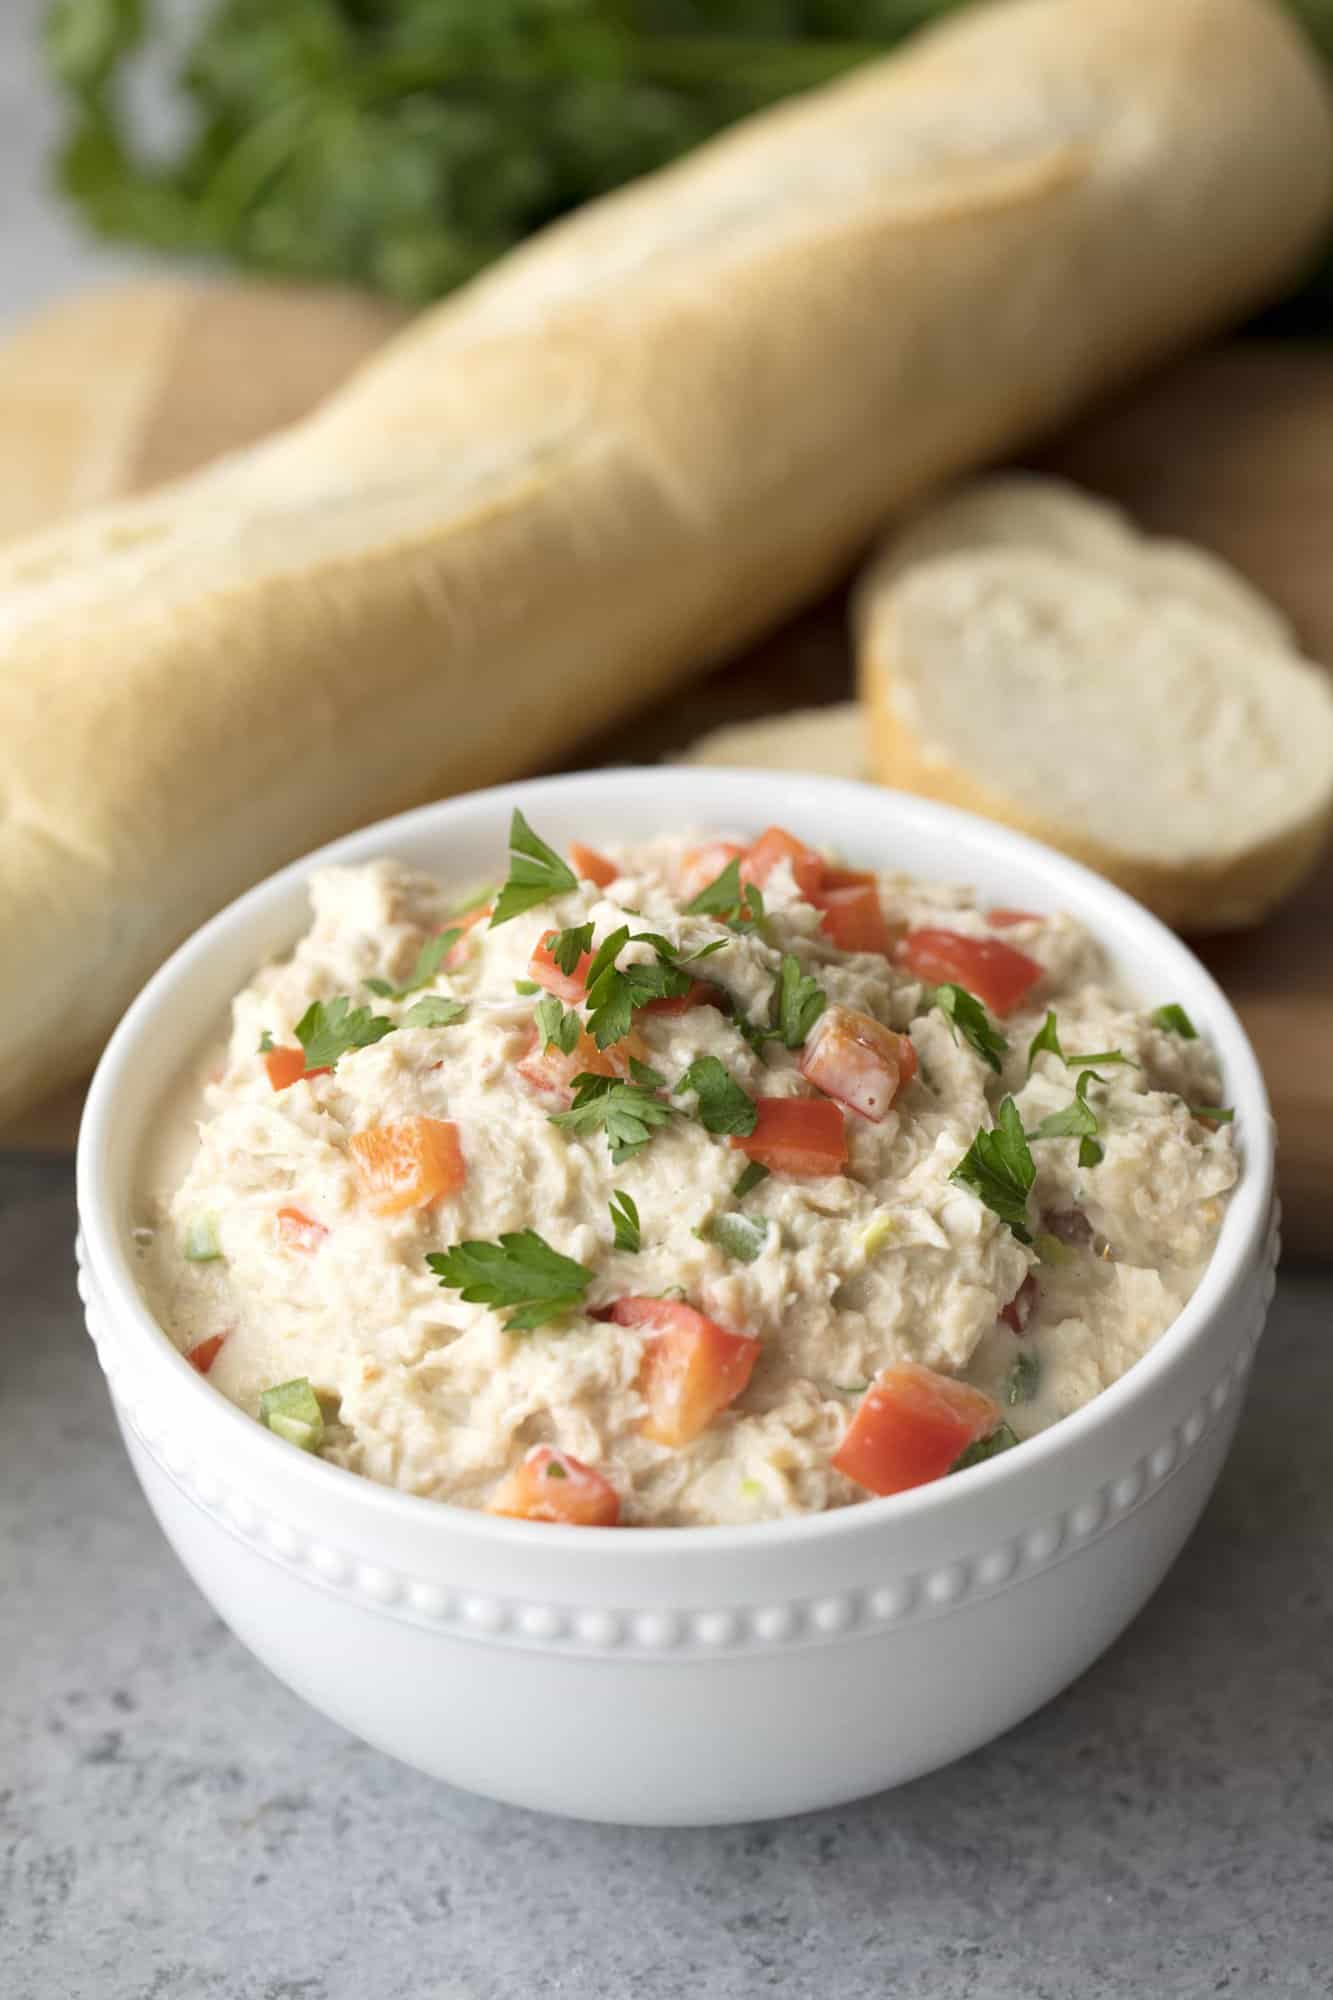 Free up time by making dip in the slow cooker. This Slow Cooker Spicy Crab Dip is a favorite at any party. It's the best crab dip you'll ever have!